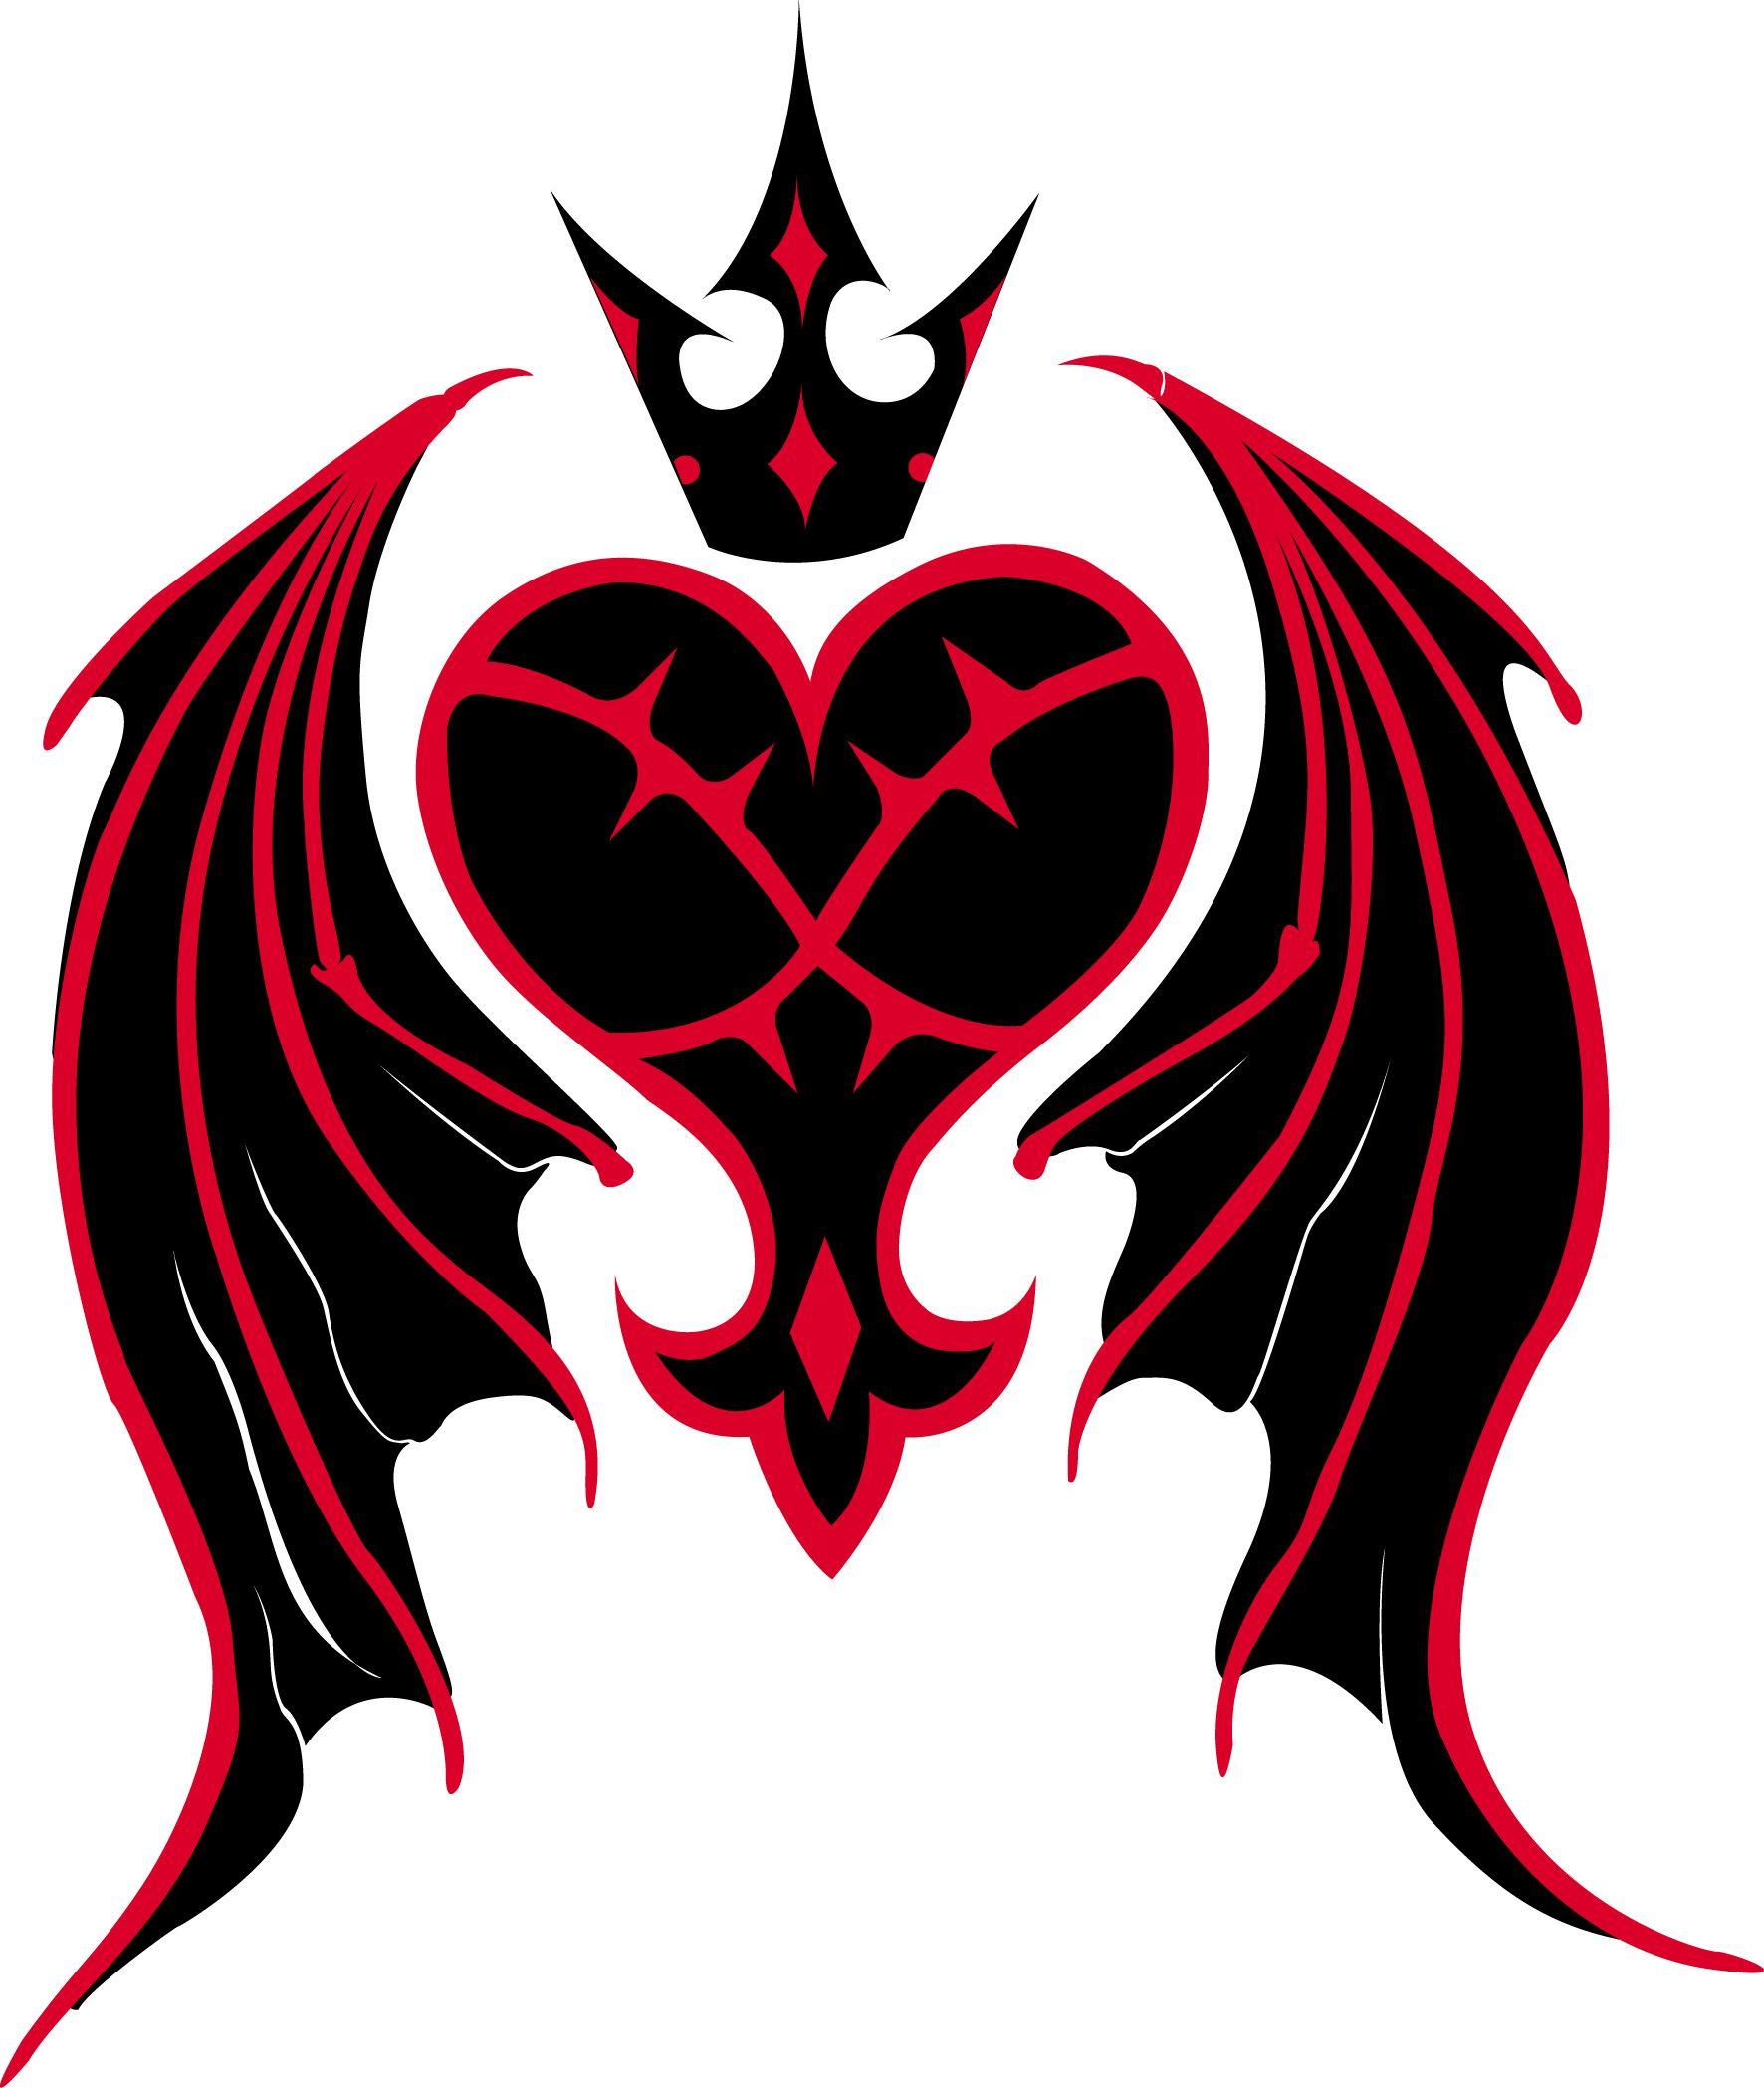 cool heart icon